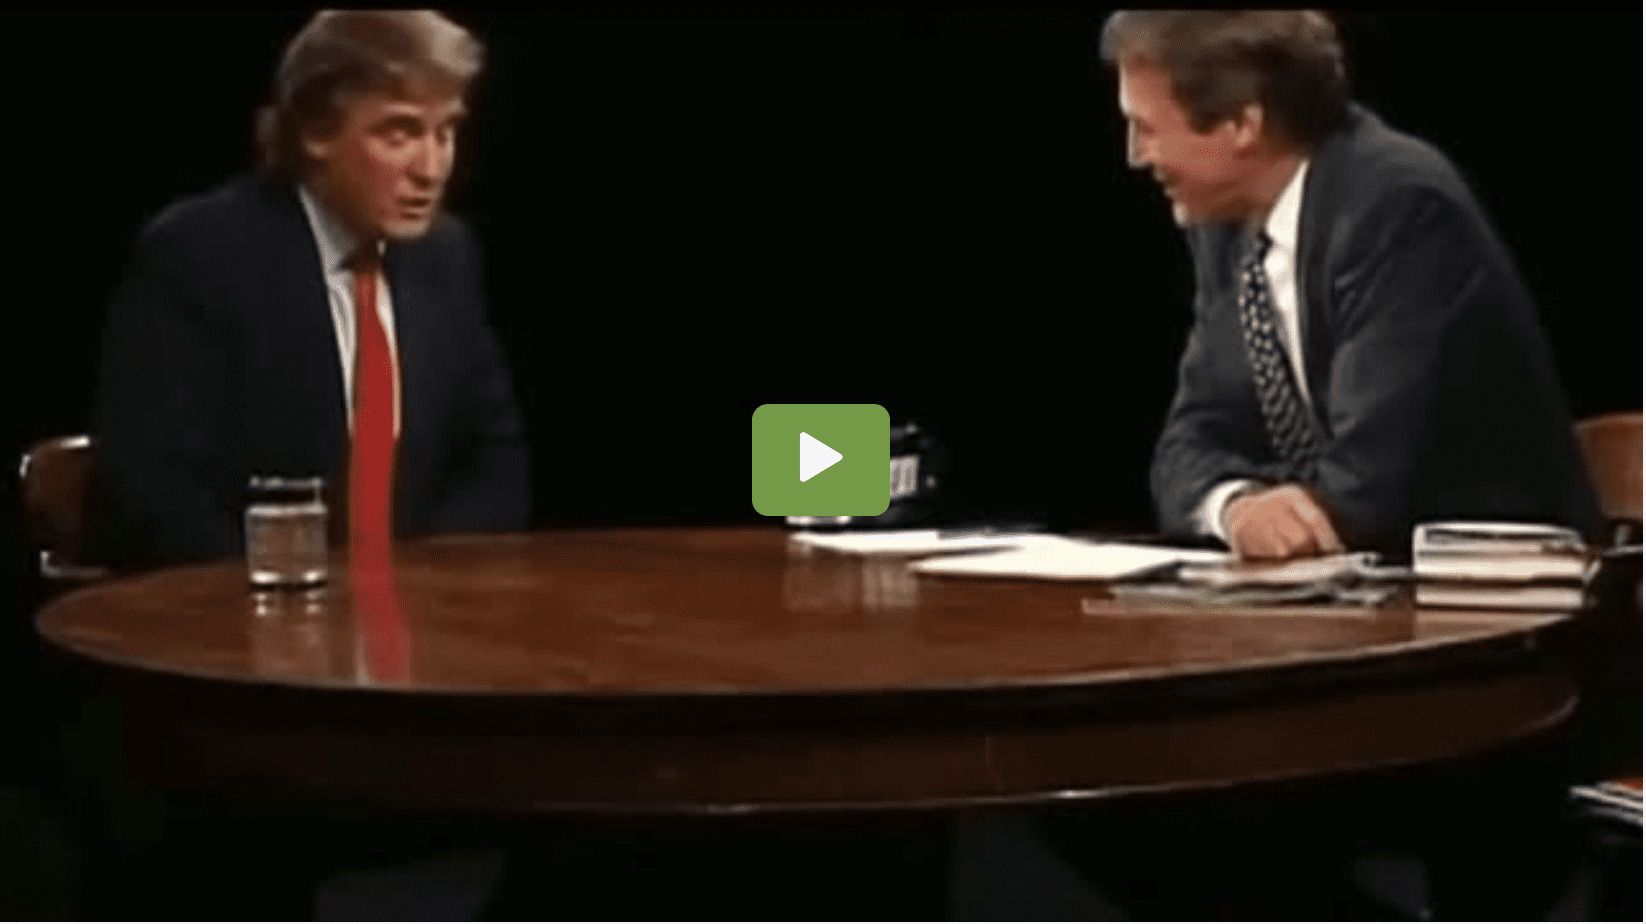 ARCHIVE FOUND: Donald Trump Was Very Prophetic 30 Years Ago